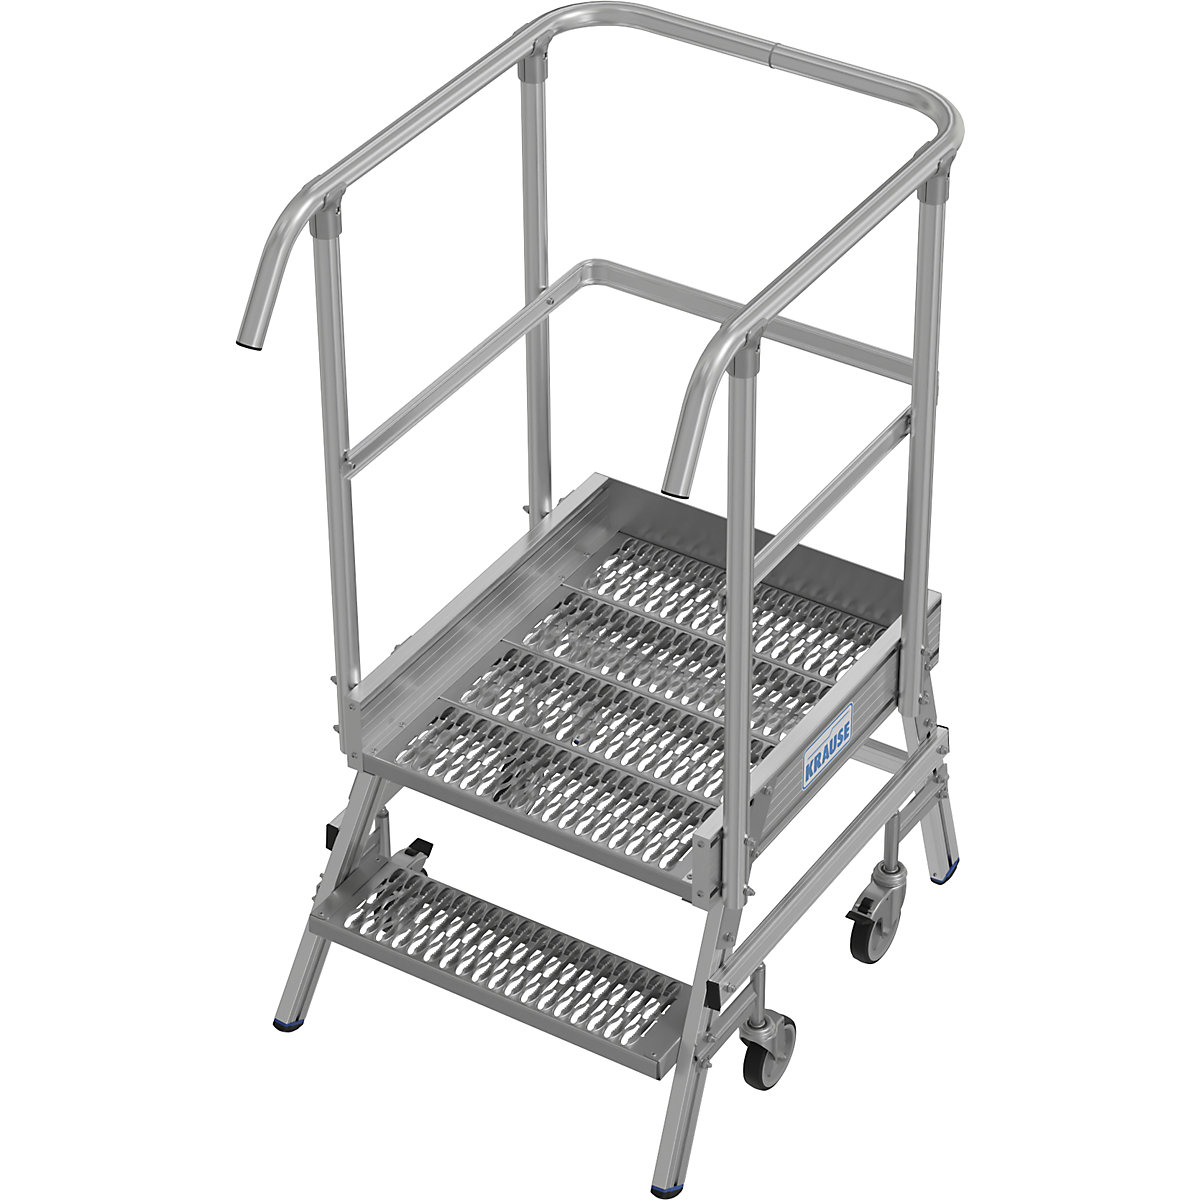 Mobile safety steps with R13 anti-slip properties – KRAUSE, with single sided access, 2 steps incl. platform-4